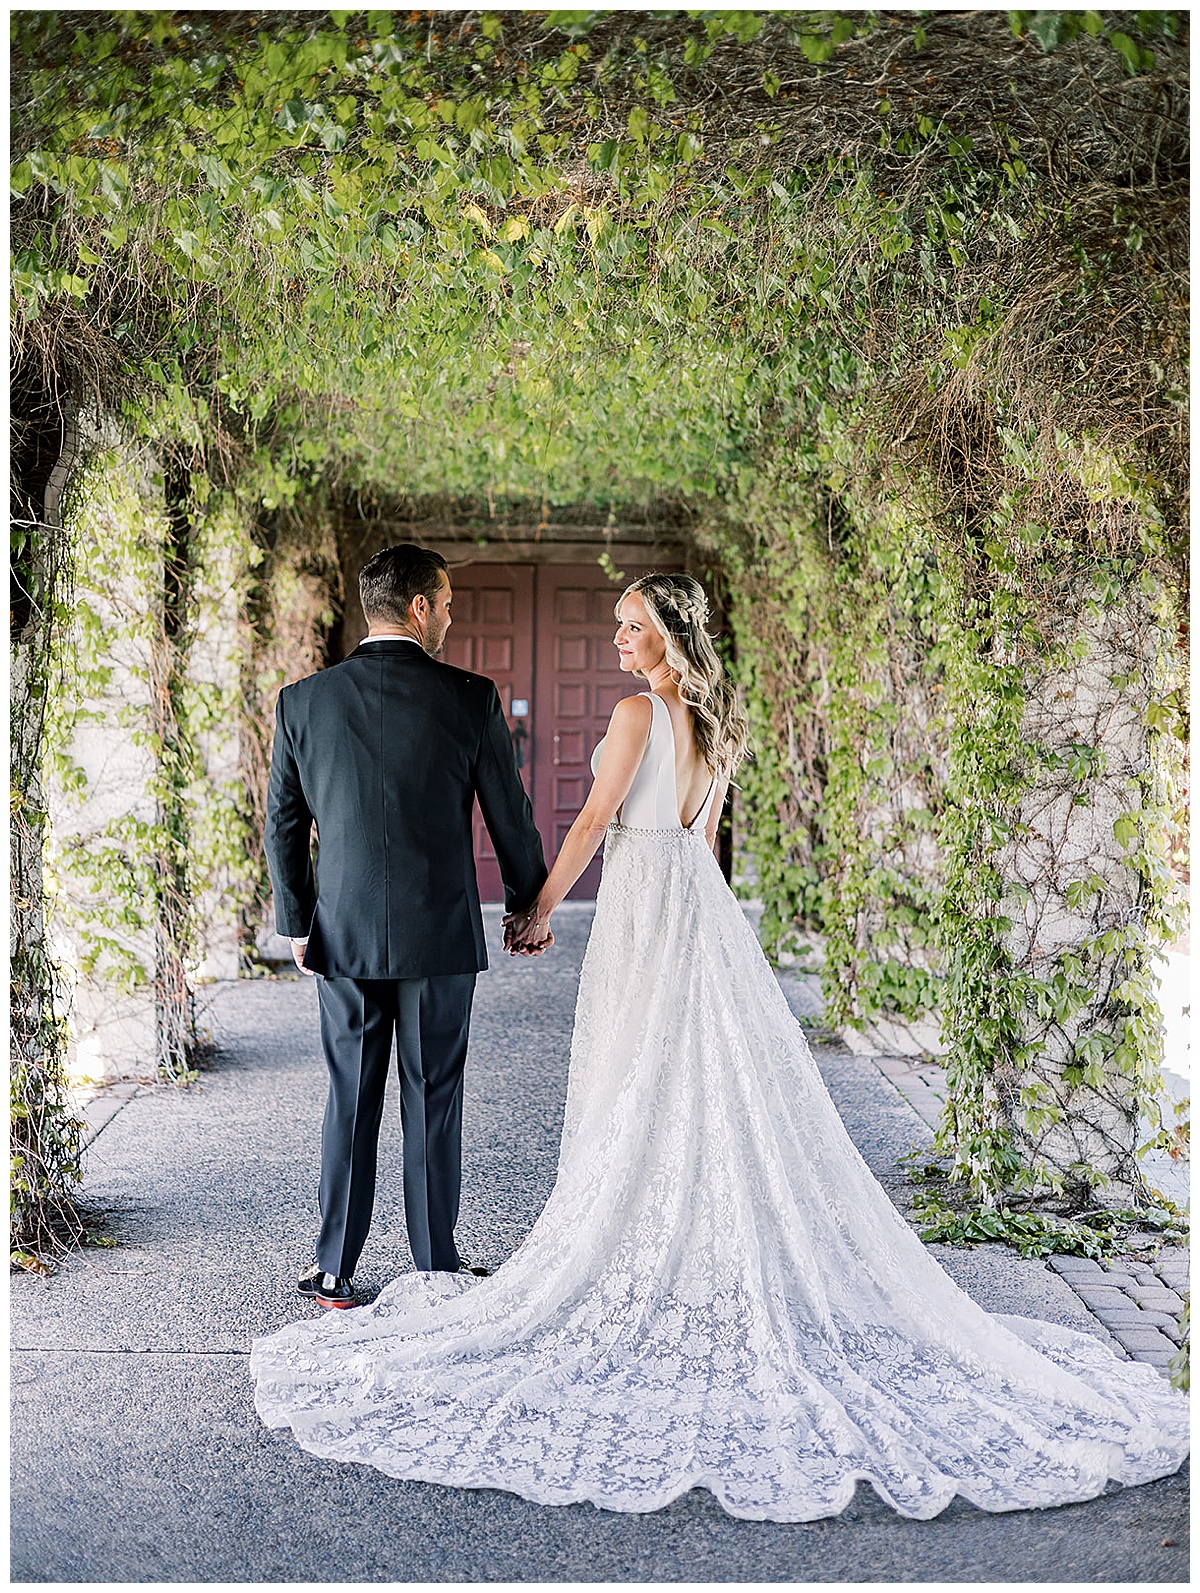 Stunning couple stand hand in hand in wedding attire for Kayla Bouren Photography